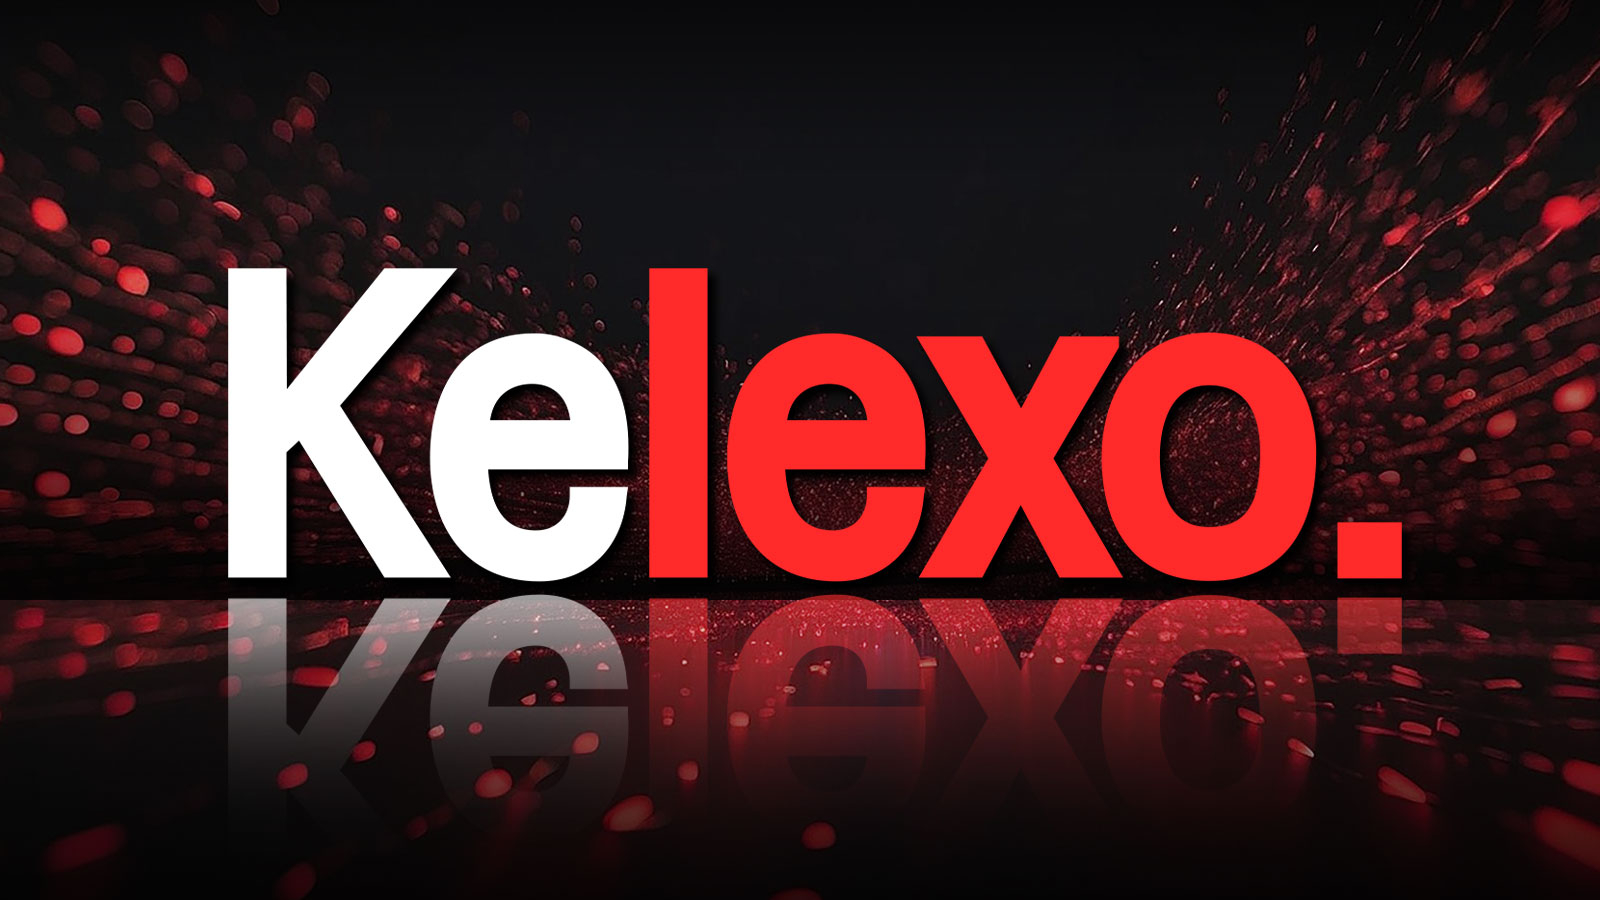 Kelexo (KLXO) Novel Sale Phase Might be Spotlighted in March as Tron (TRX), Avalanche (AVAX) Major Altcoins Recovering